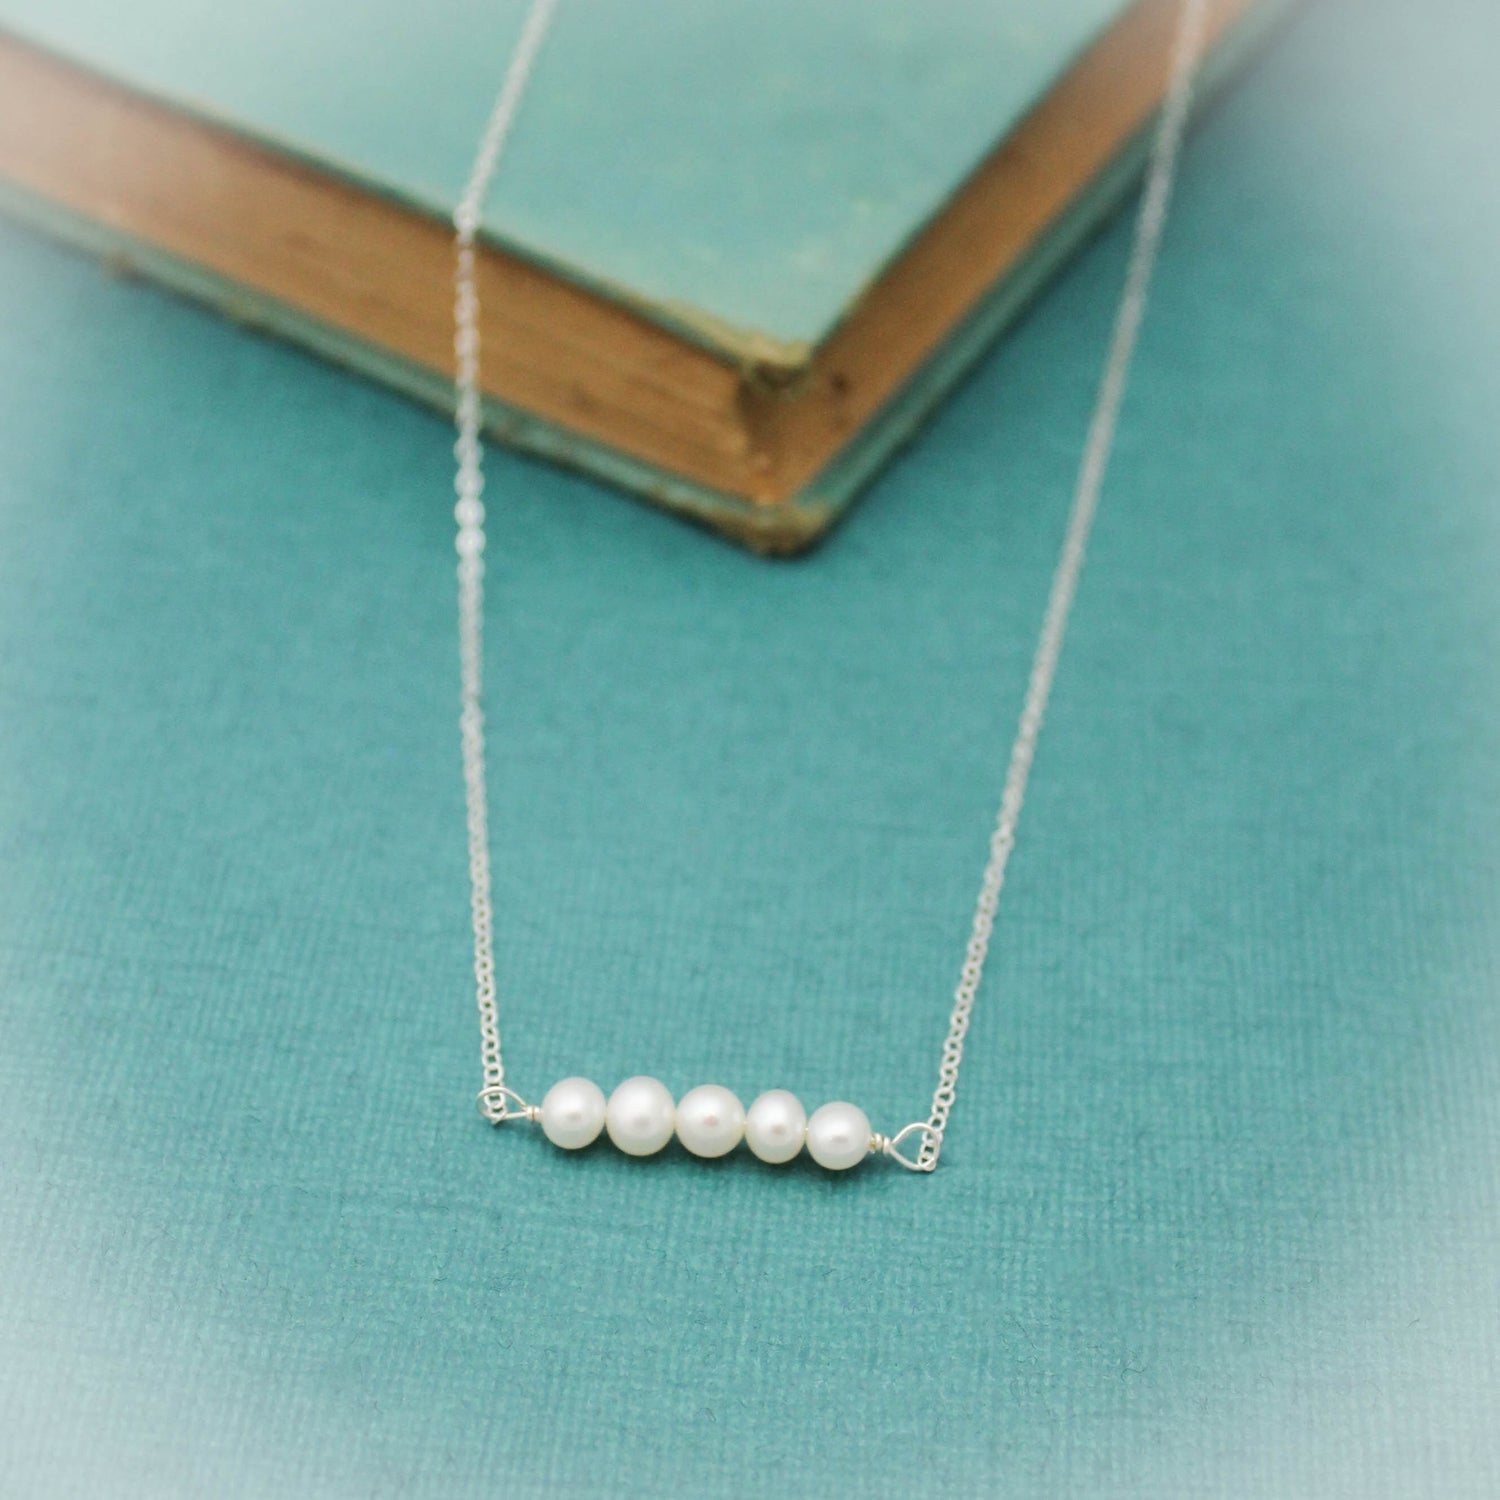 Pearl Bar Necklace, June Birthday Gift, Birthstone Jewelry, Pearl Jewelry, Sterling Silver Bar Necklace, Gift for Her, Summer Cruise Jewelry